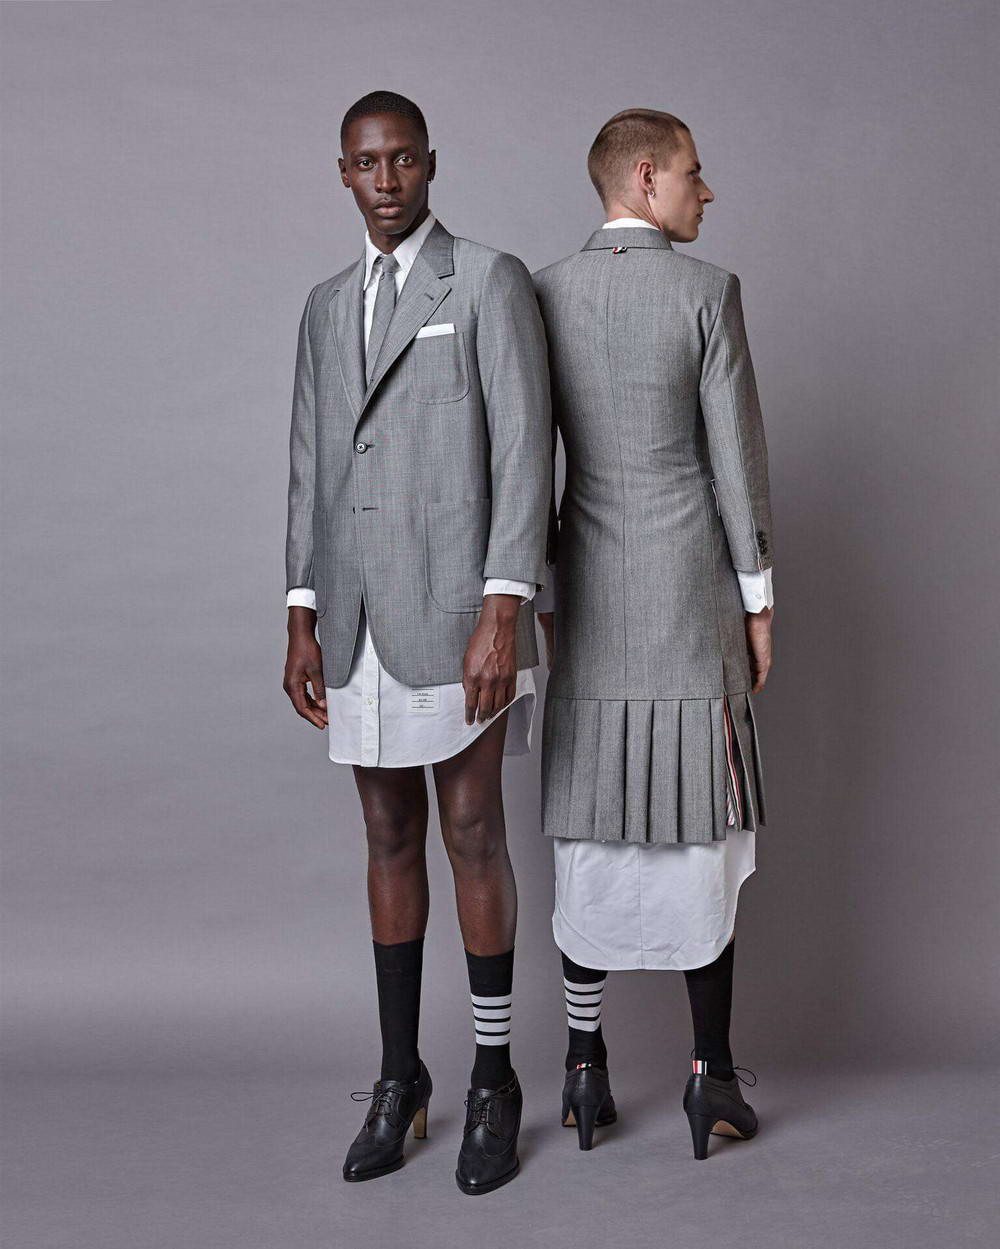 Men's Summer Fashion 2020 Featuring Skirts and Dresses for the Fellas